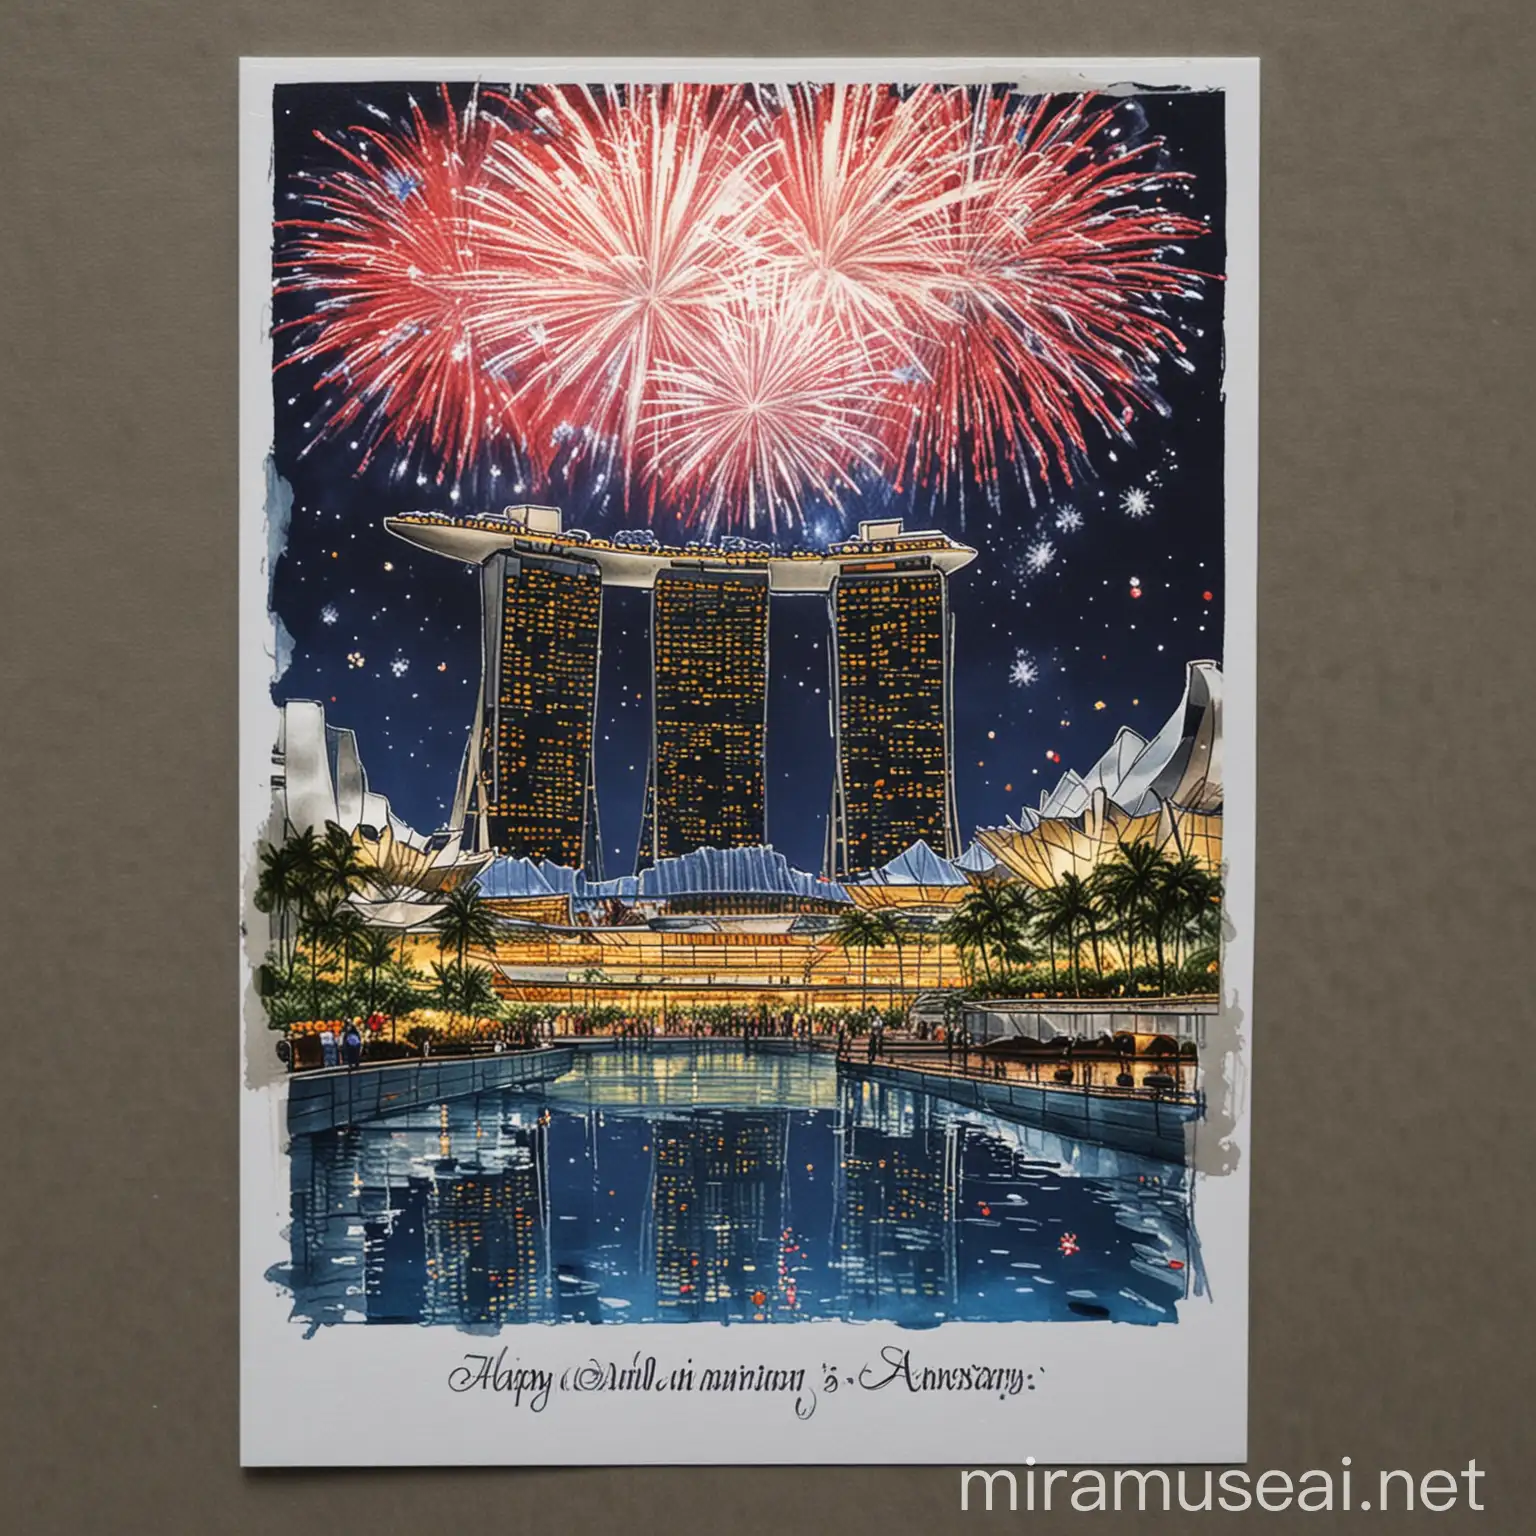 Marina Bay Sands Singapore 13th Anniversary Celebration with Infinity Pool and Fireworks